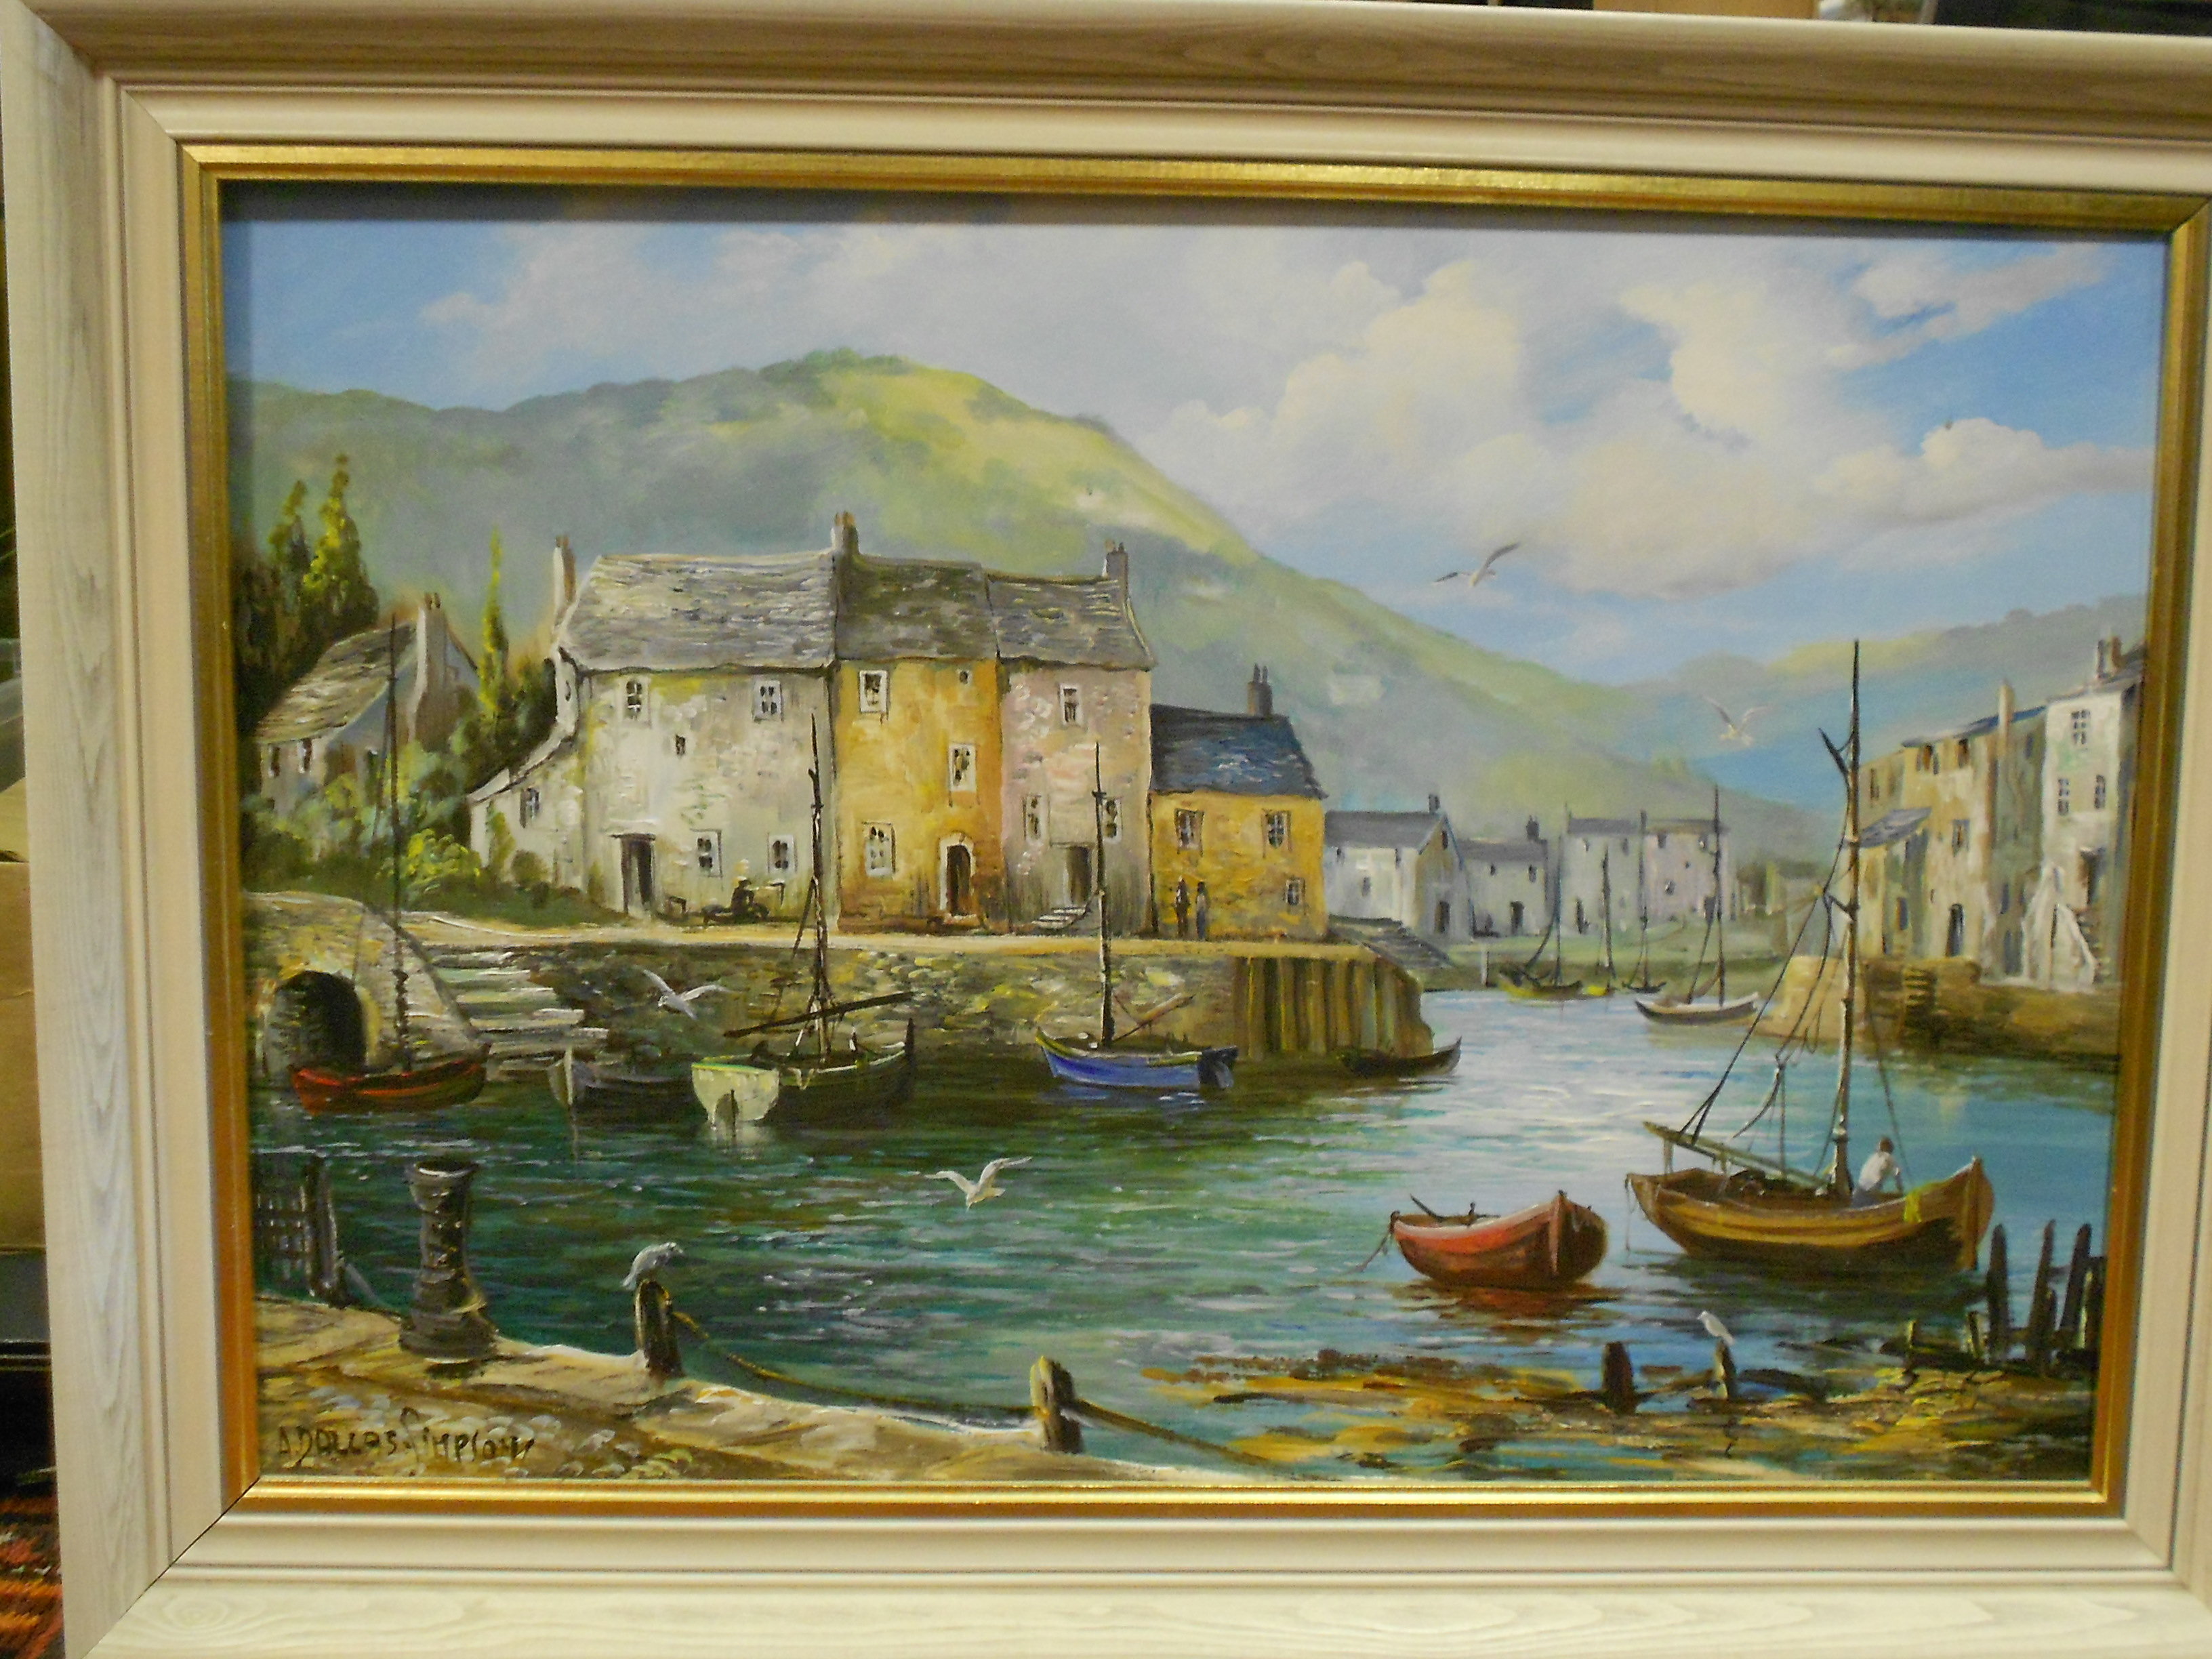 Audrey Dallas-Simpson (British, 1925-1984) -A Quiet Harbour, signed, oil on canvas, overall size